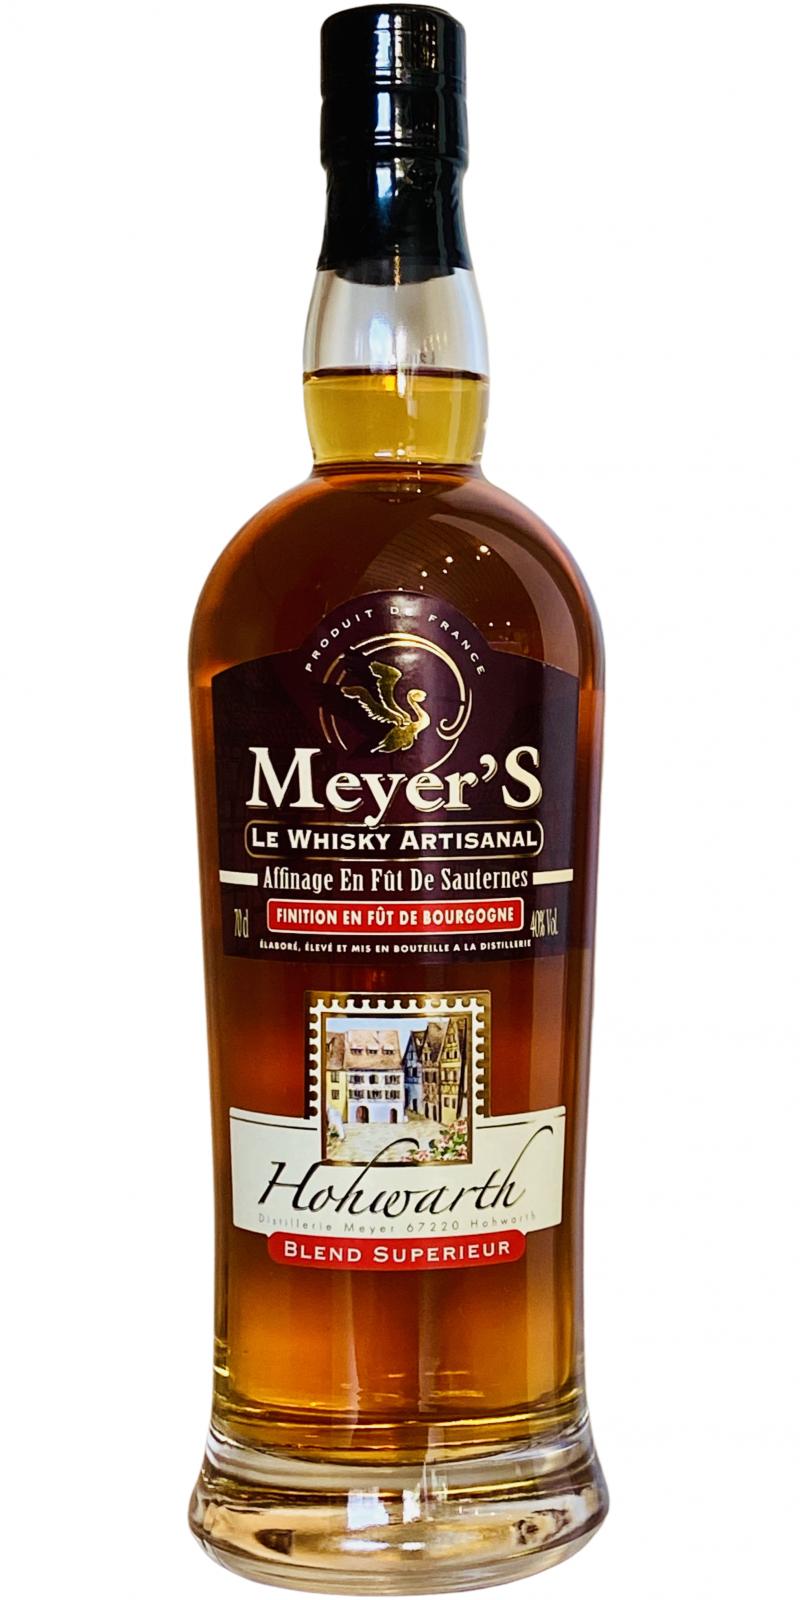 Meyer's 06-year-old